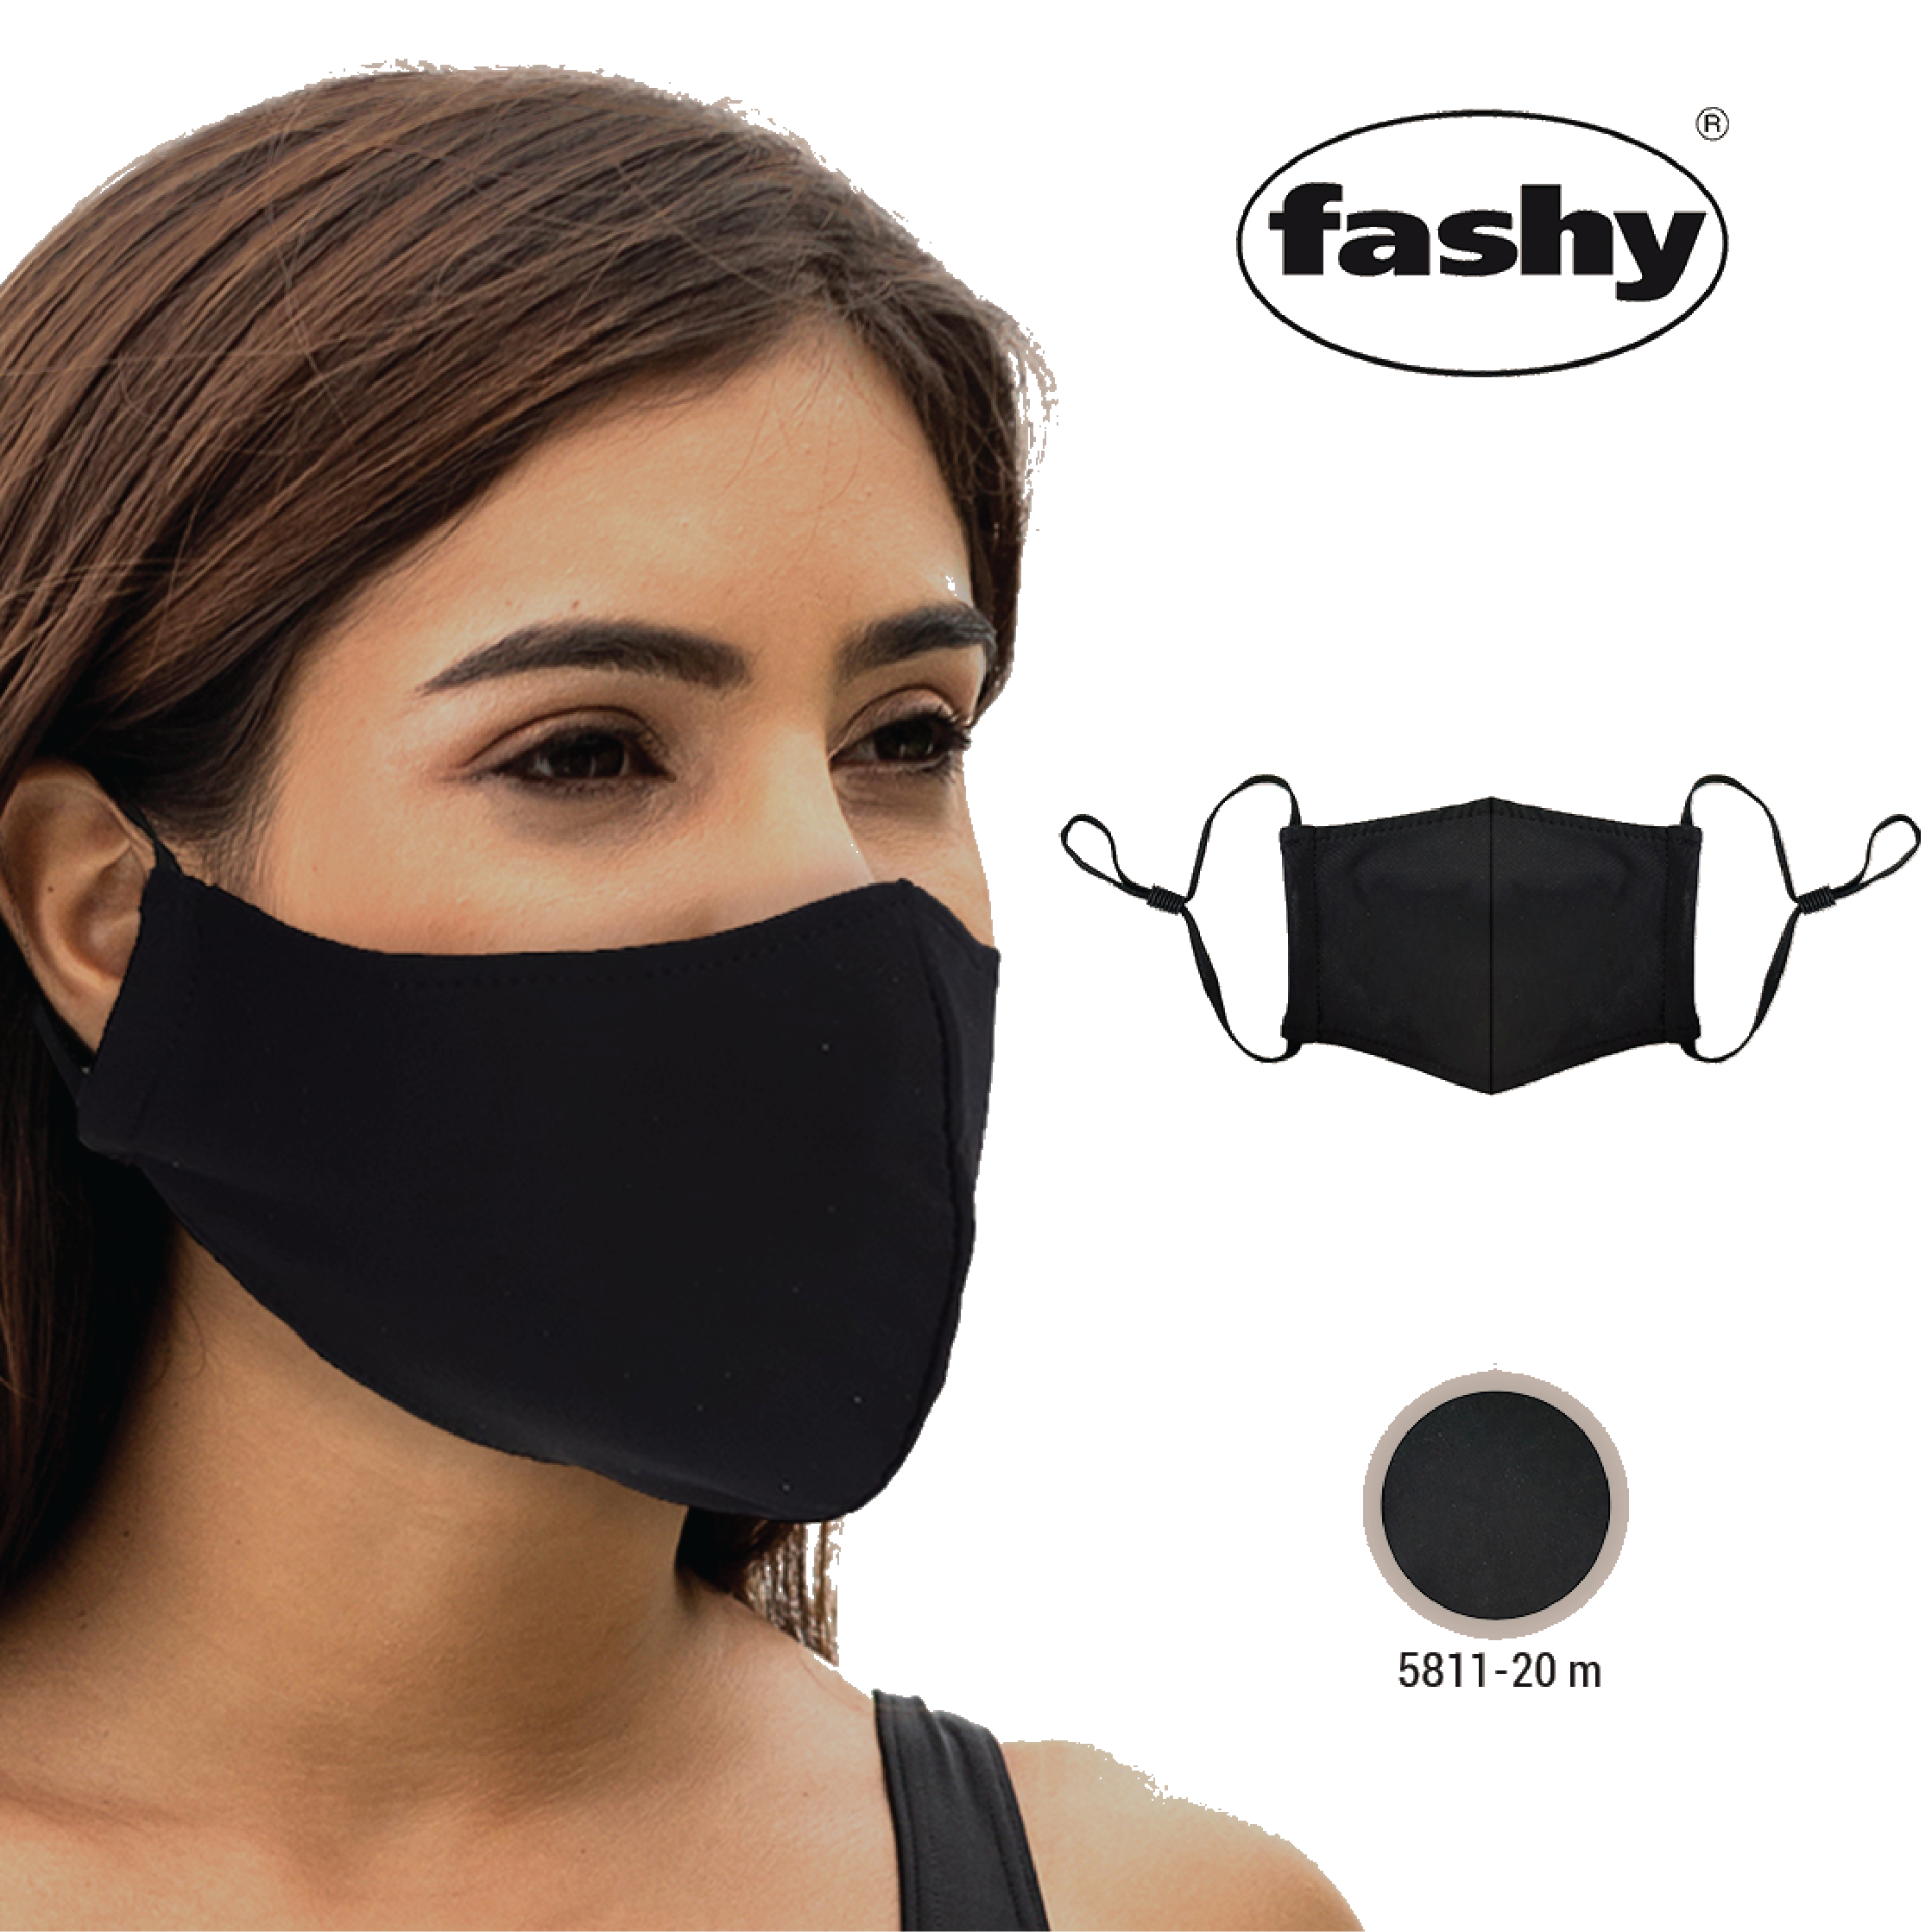 Adult Fabric Mask Black Fashy with Adjustable Rubber 1pcs Multipurpose Controlling